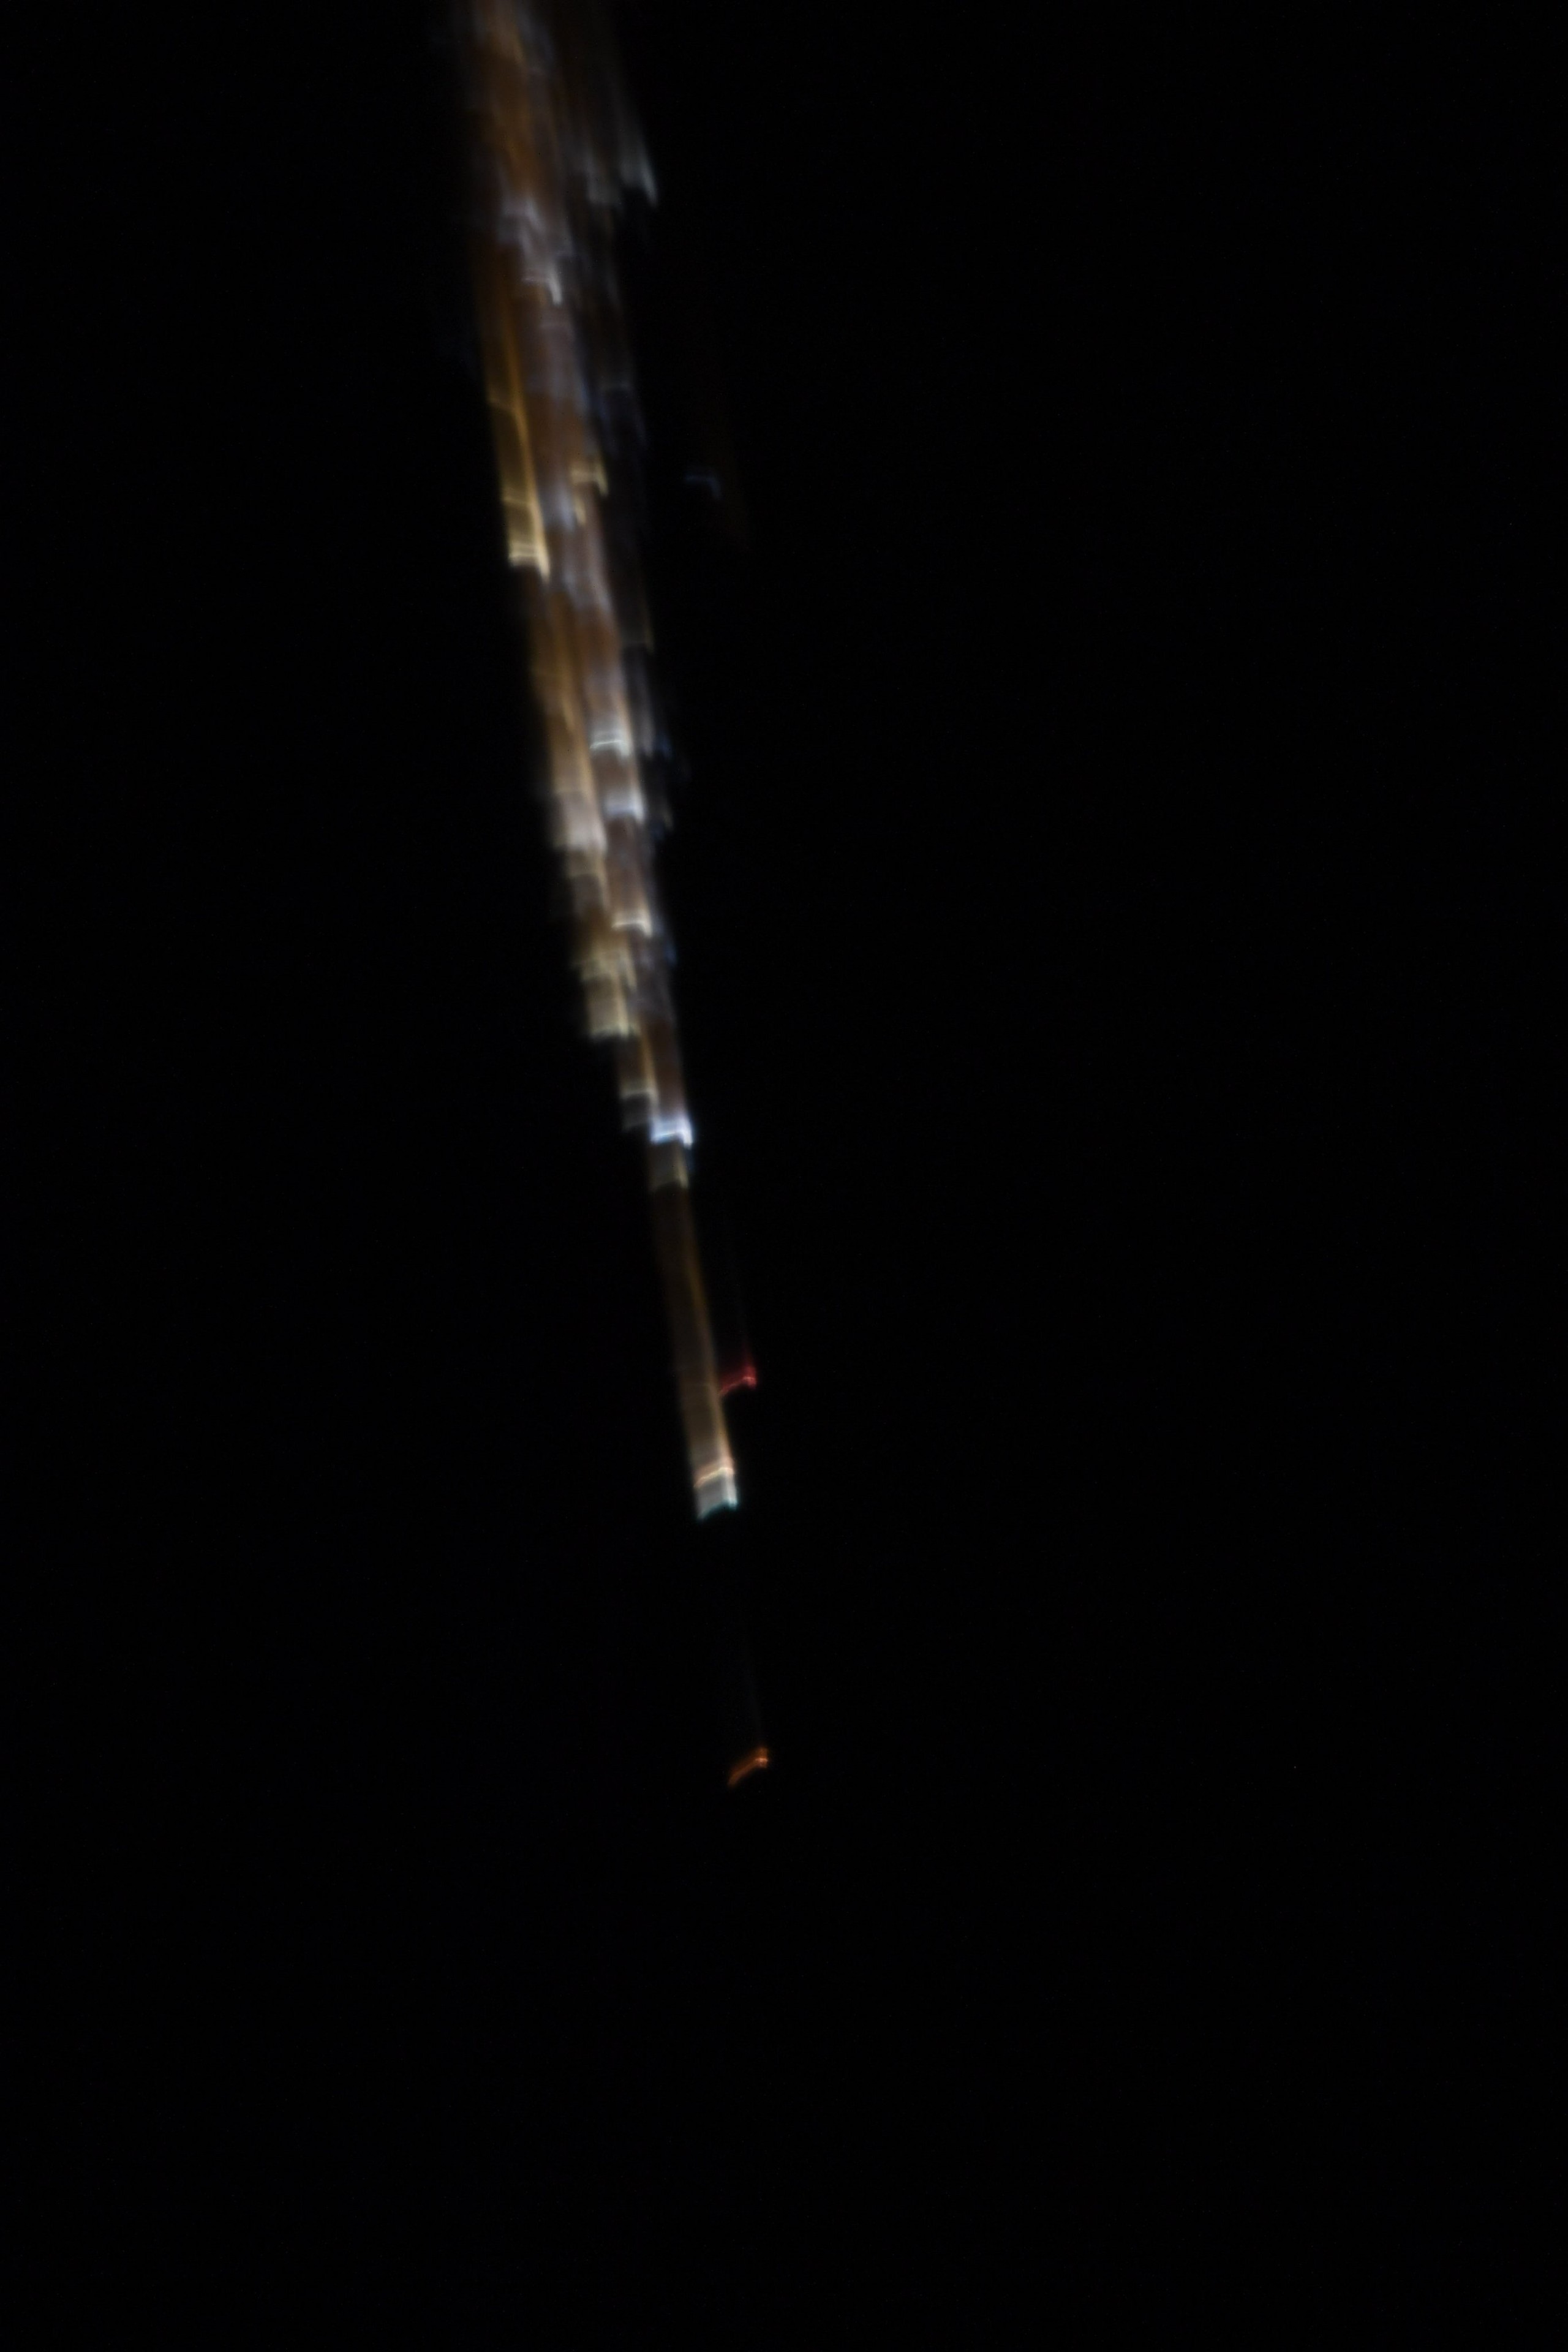 bright trails of fire can be seen against the blackness of space